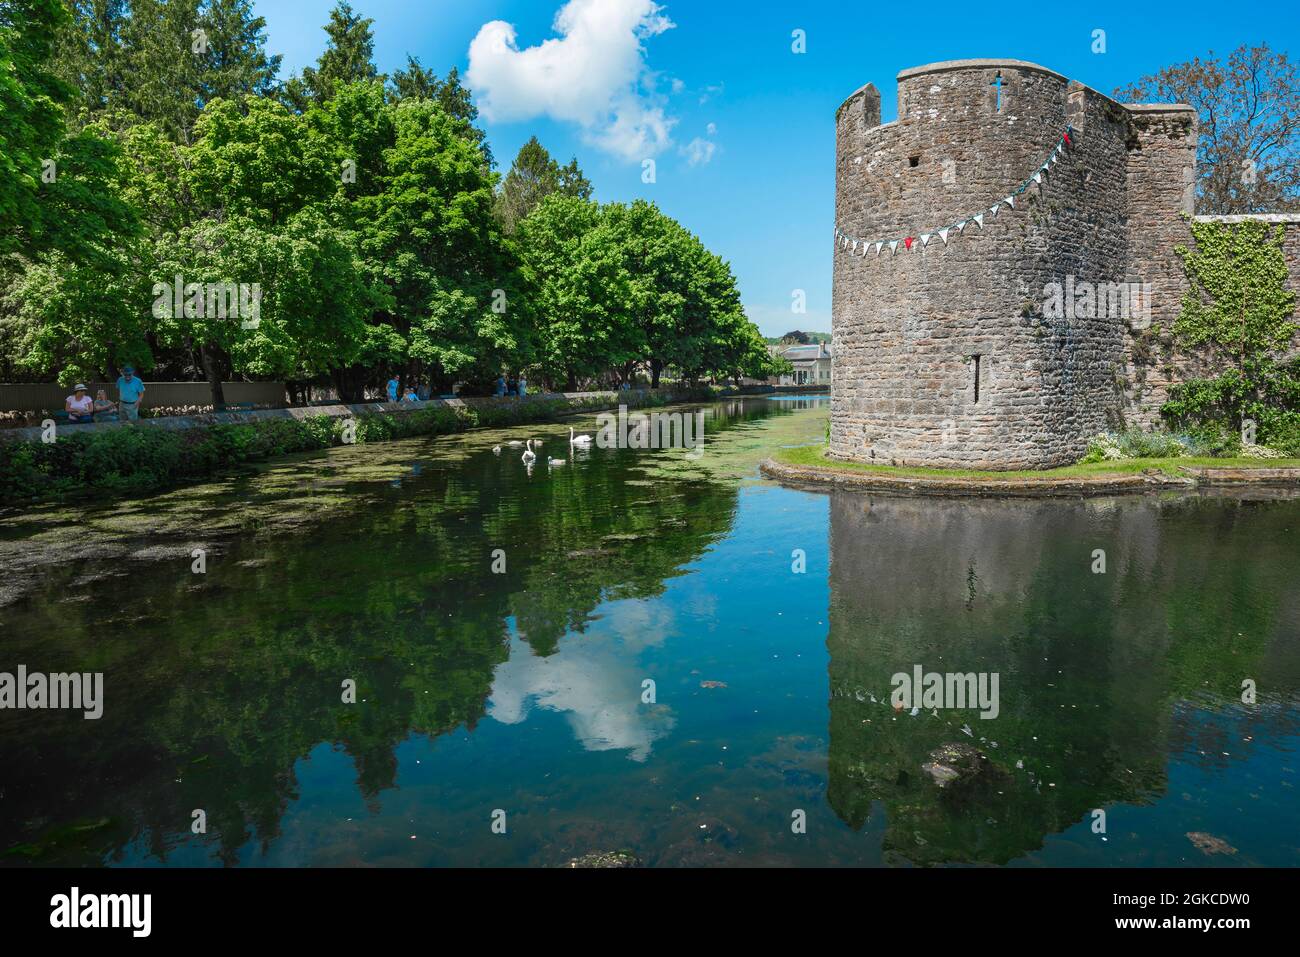 Bishop's Palace Wells, view in summer of the moat at the south-west corner of the walled Bishop's Palace in Wells, Somerset, England, UK Stock Photo